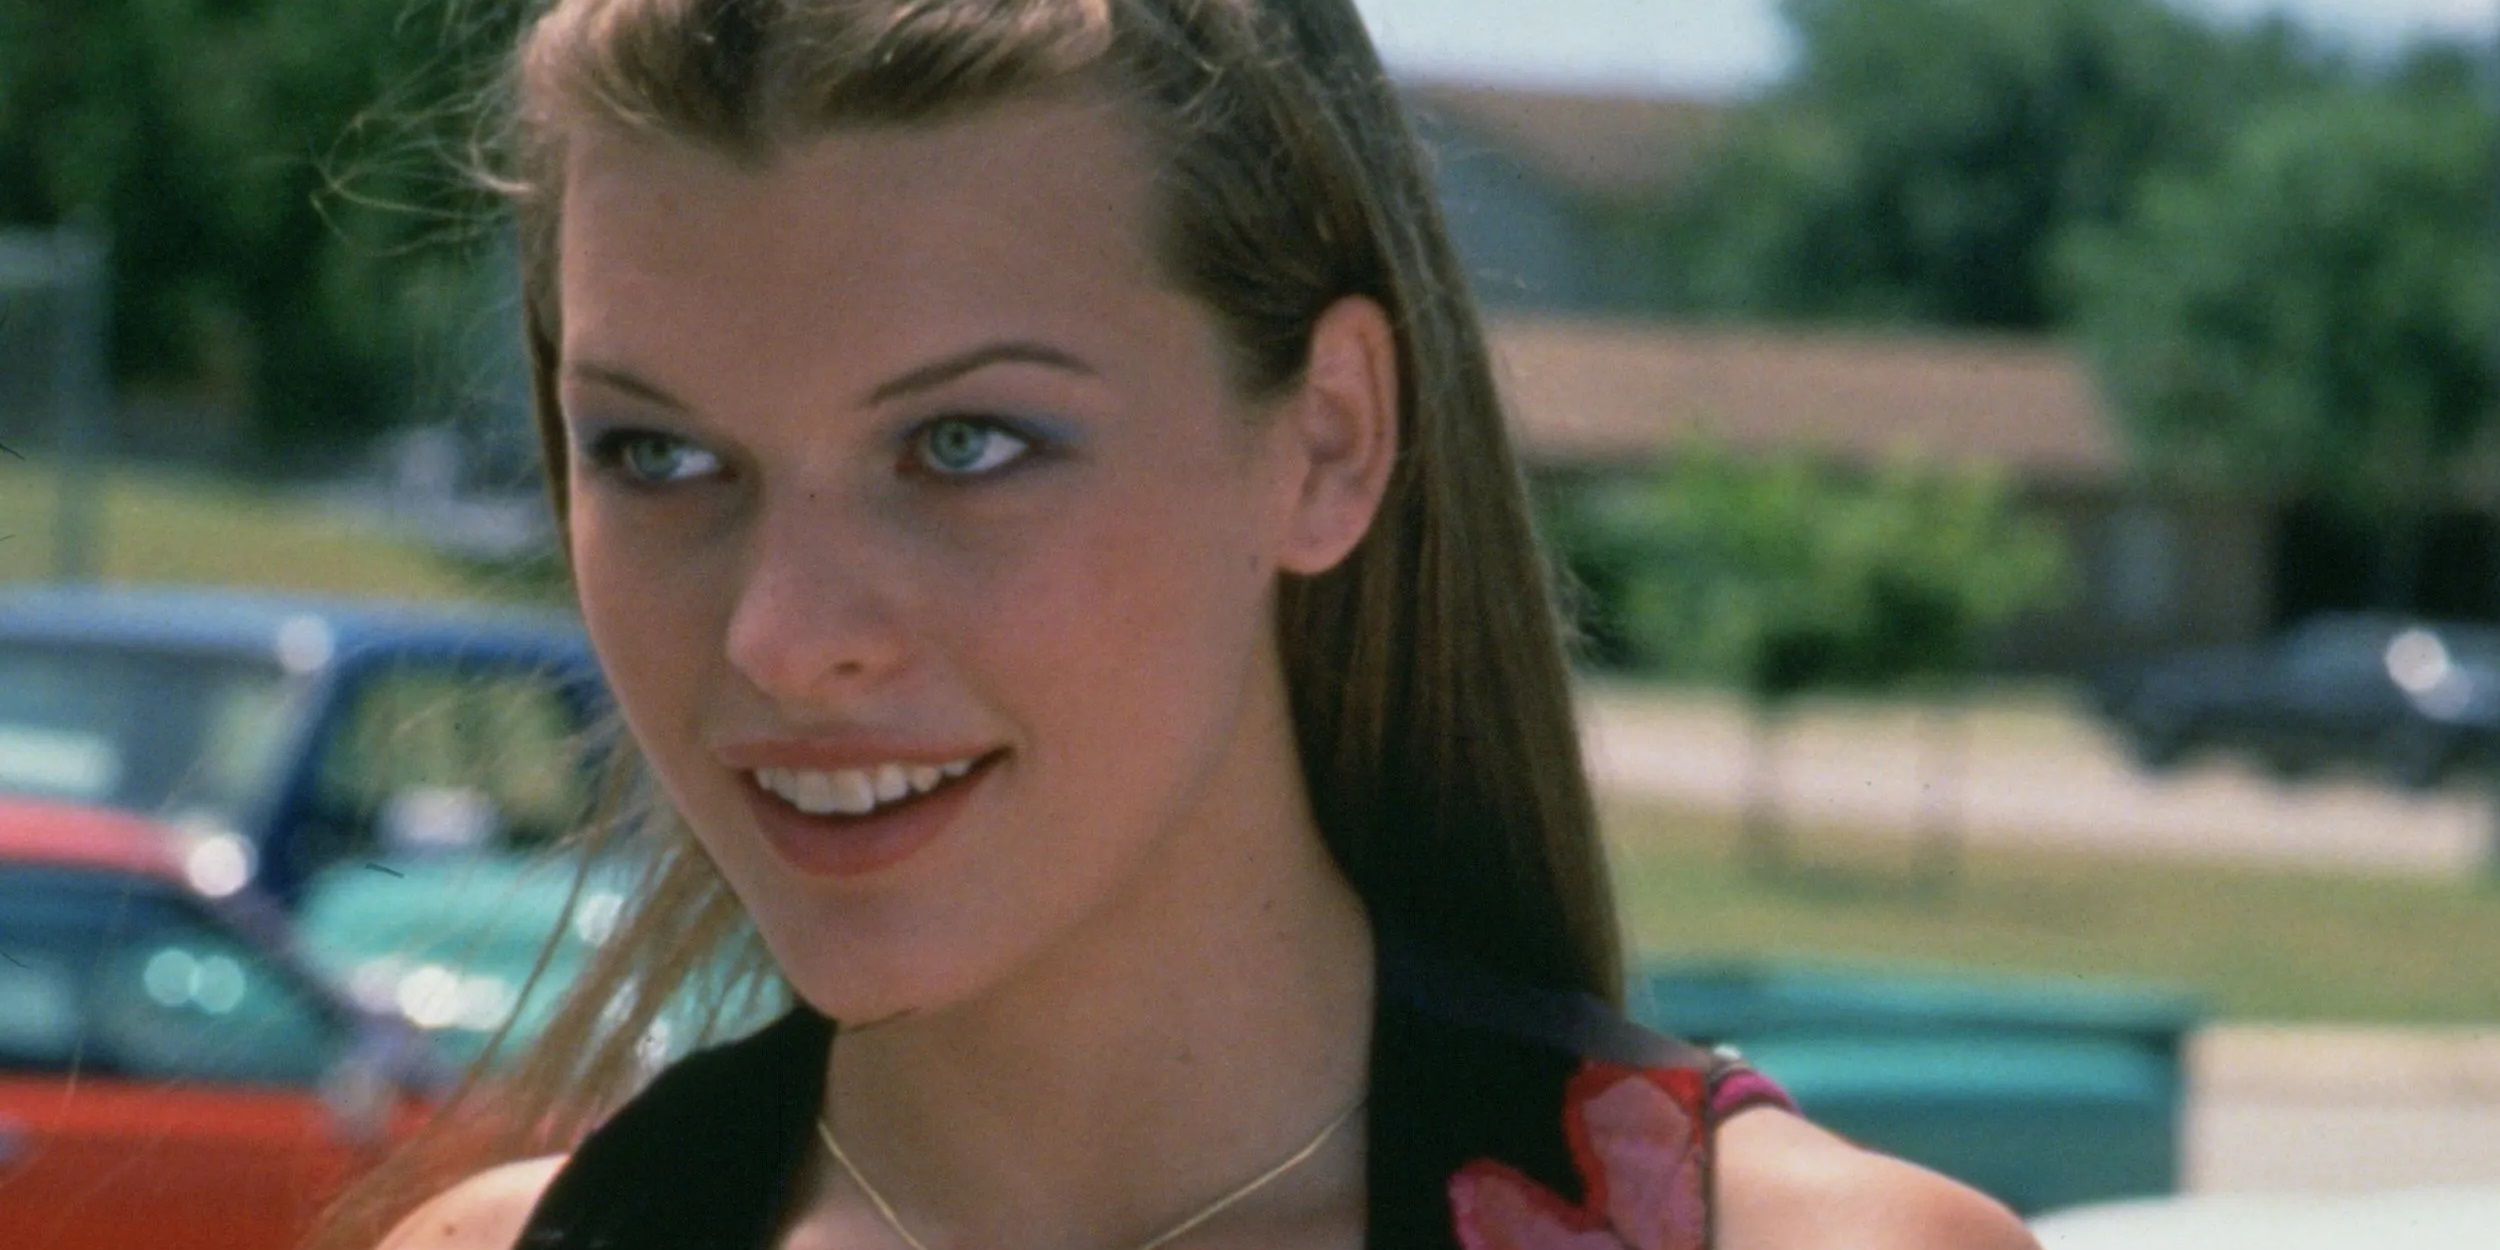 Milla Jovovich in the opening of Dazed and Confused smiling